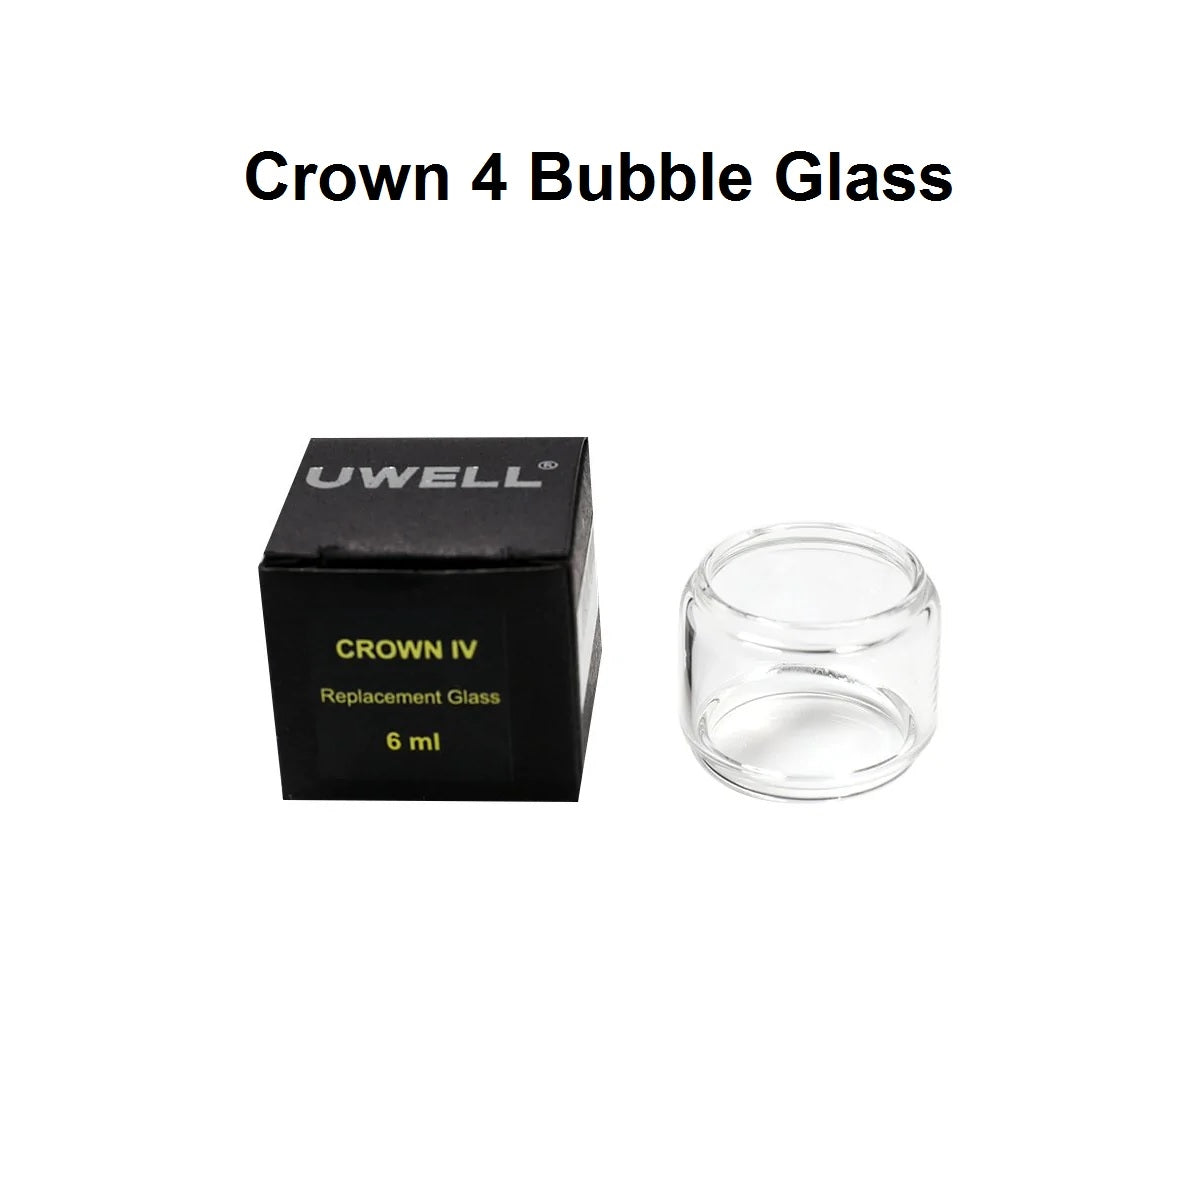 UWELL CROWN 4 REPLACEMENT GLASS 6ML 1PC